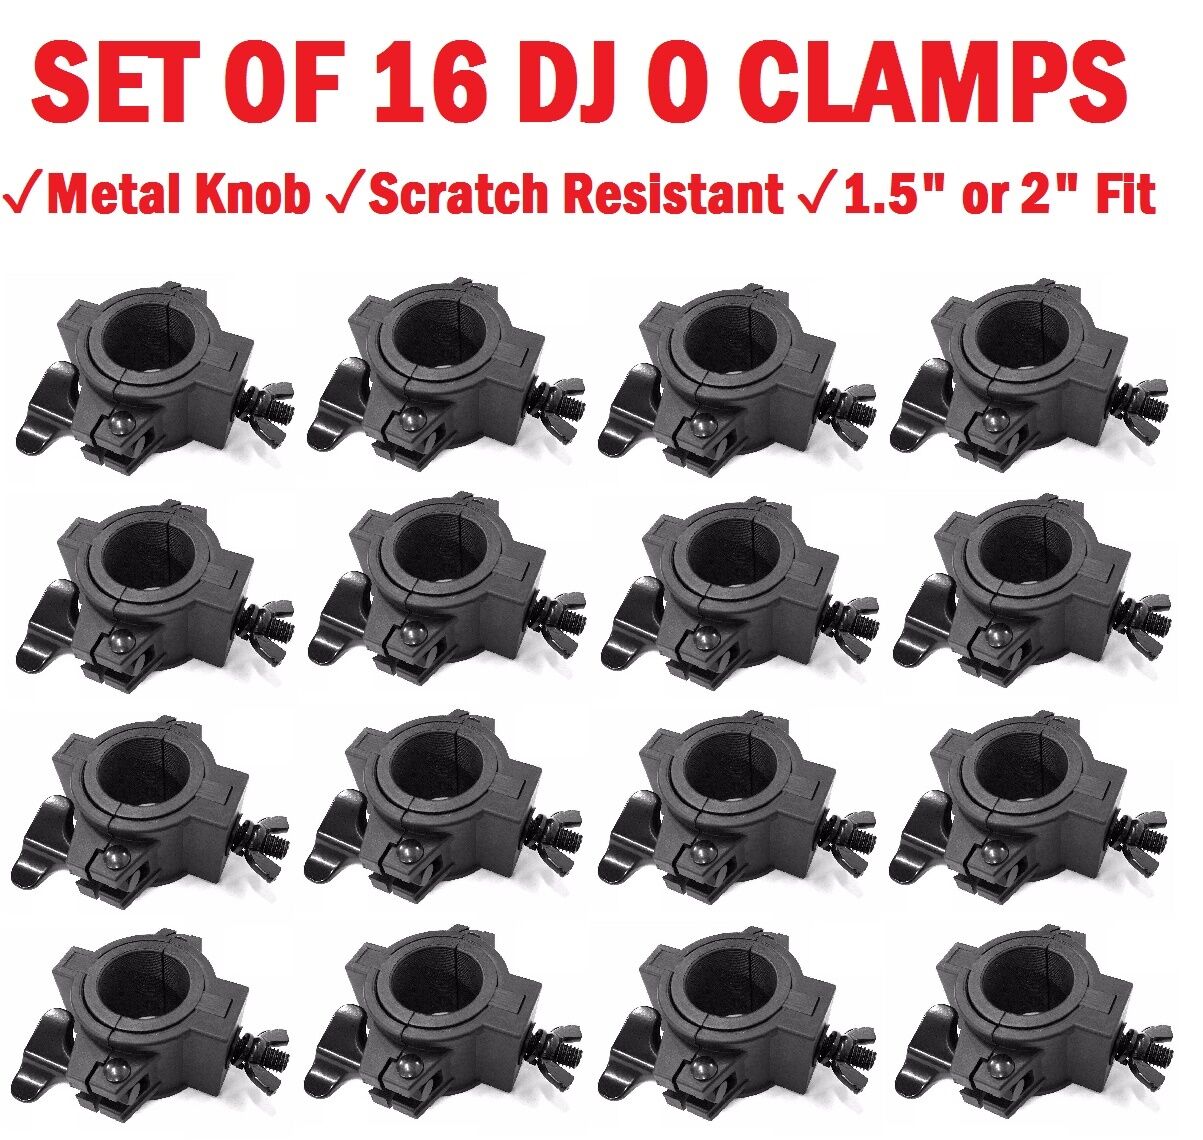 O-clamp 16 Pack Dj Lighting Clamp To Mount Light To 1.5" - 2" Trussing And Pipe